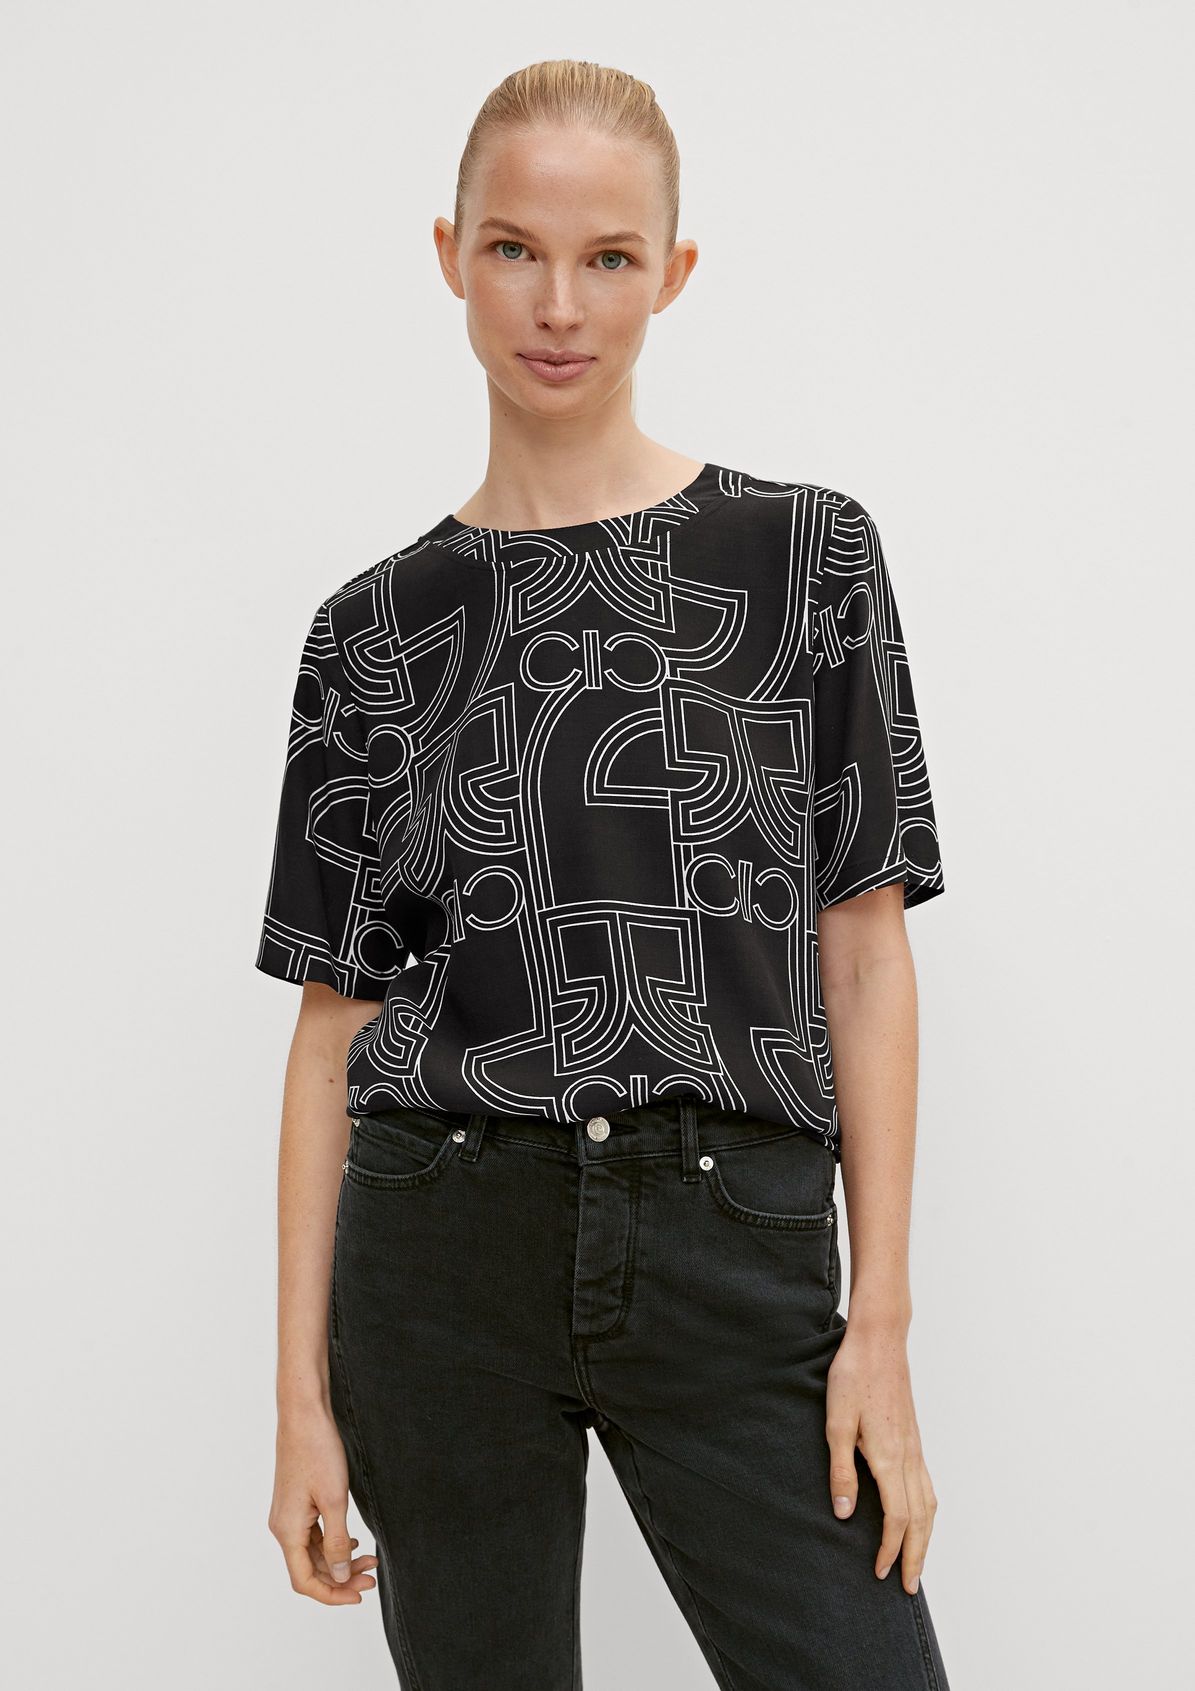 Blusenshirt mit Allover-Print from comma